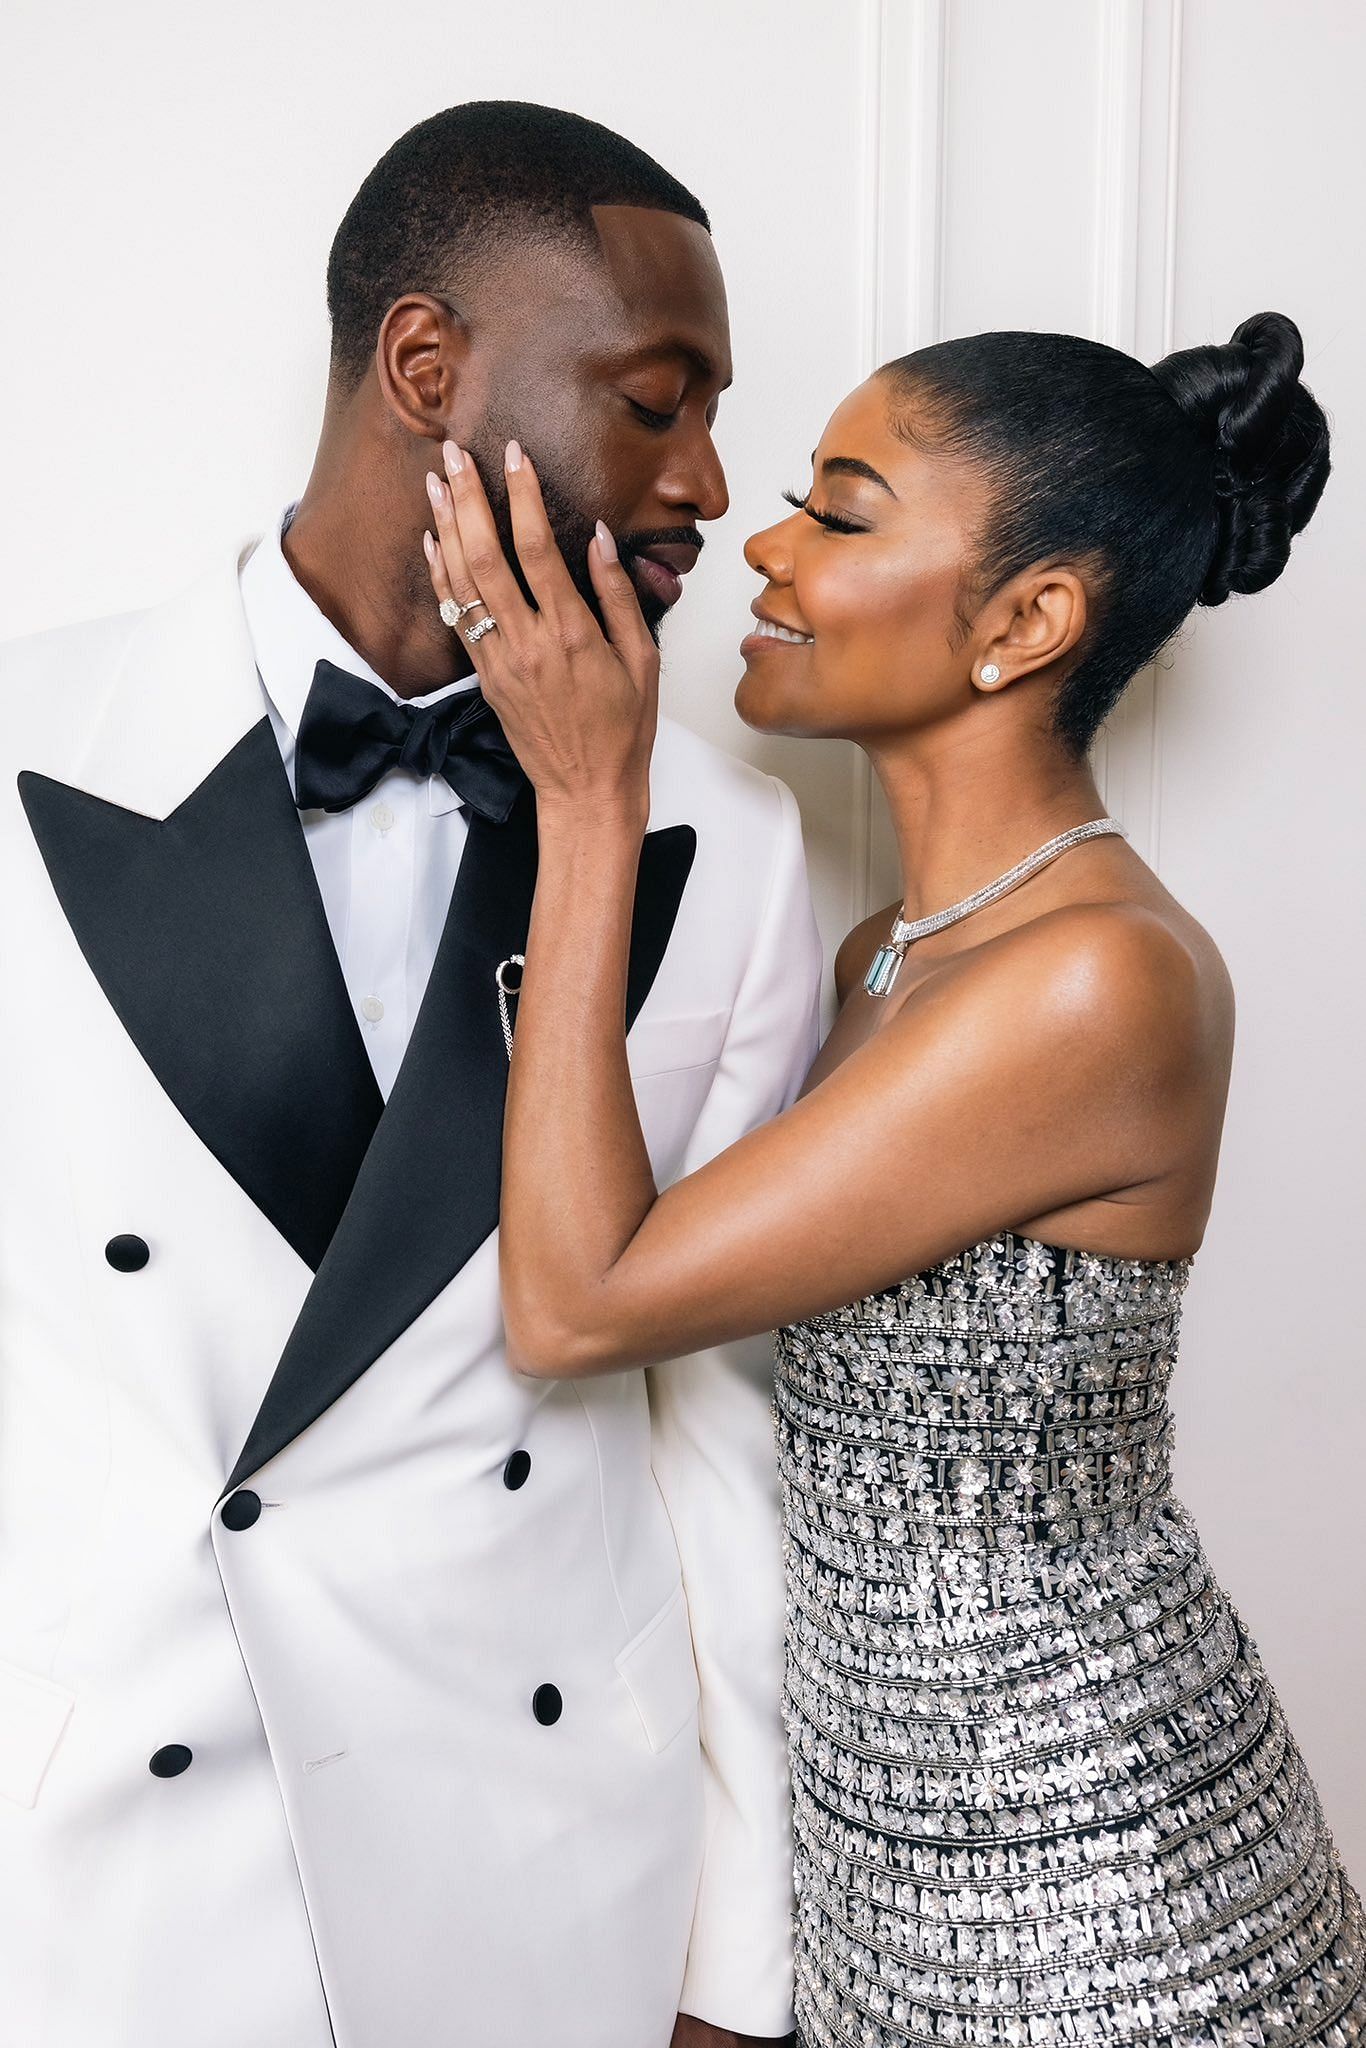 Dwyane Wade and Gabrielle Union pose for an adorable photo with their Oscars outfits